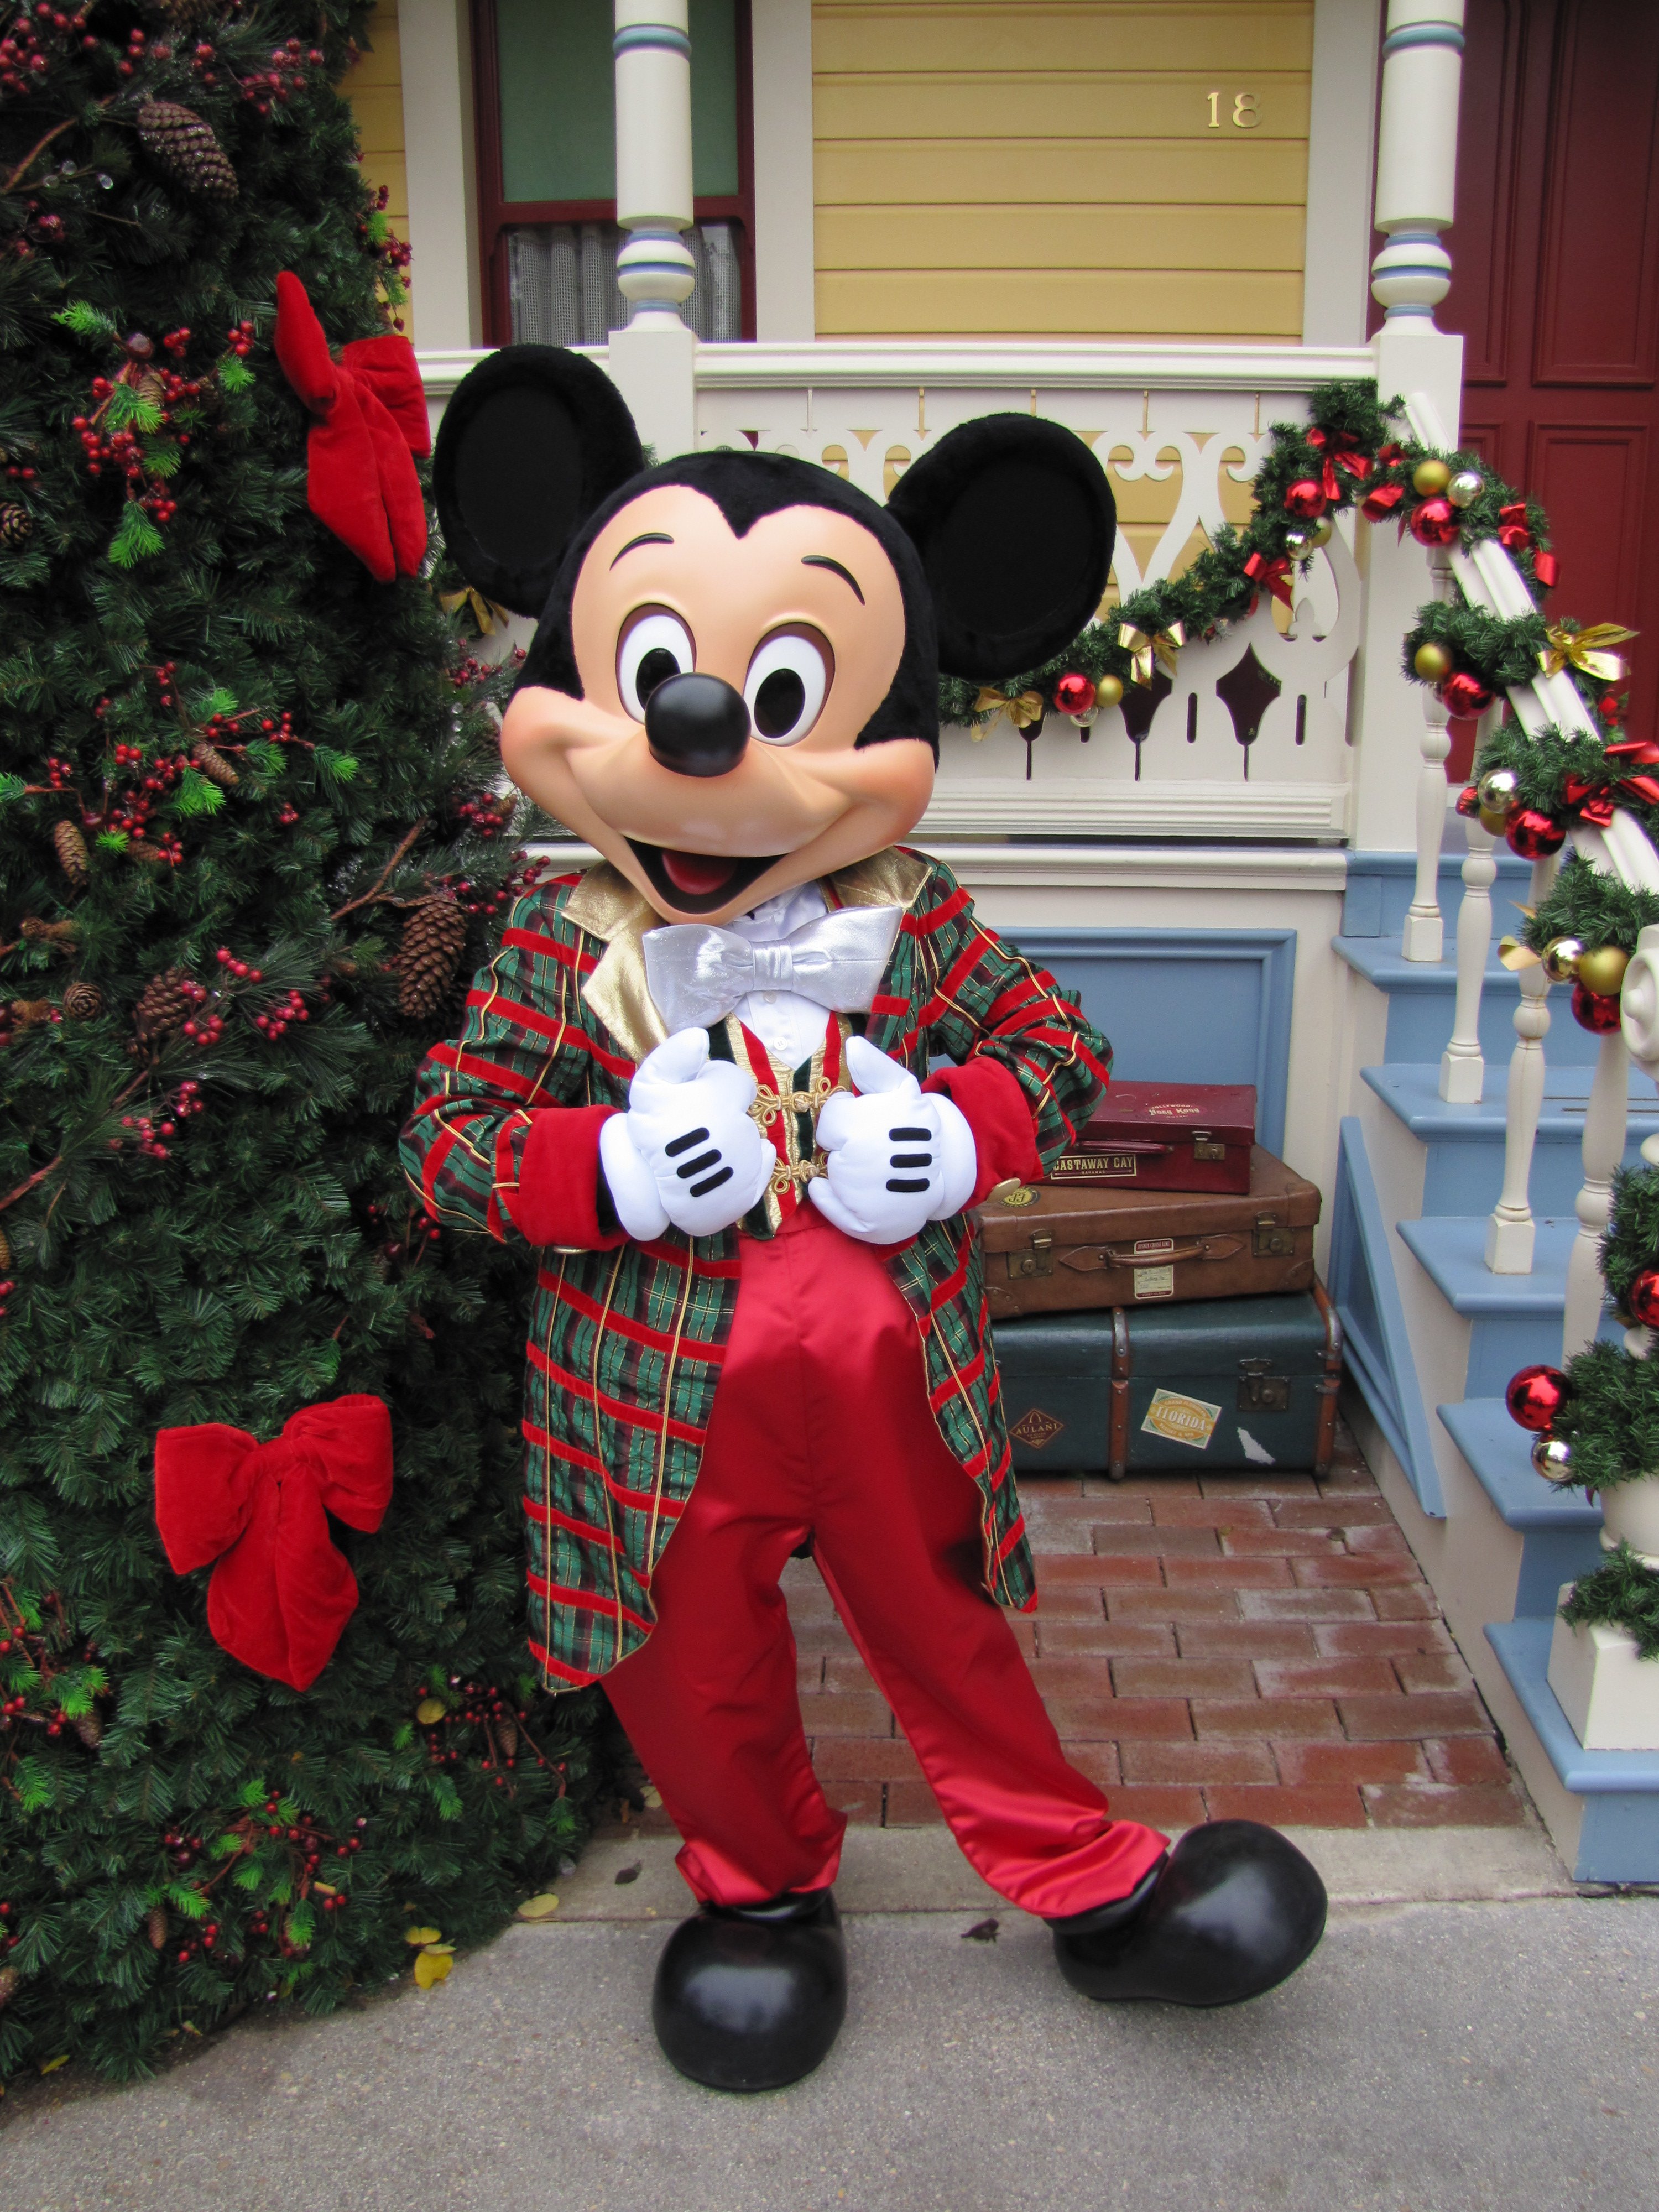 Mickey wearing his Christmas outfit during the 2011/2012 Christmas Season at the Disneyland Park.